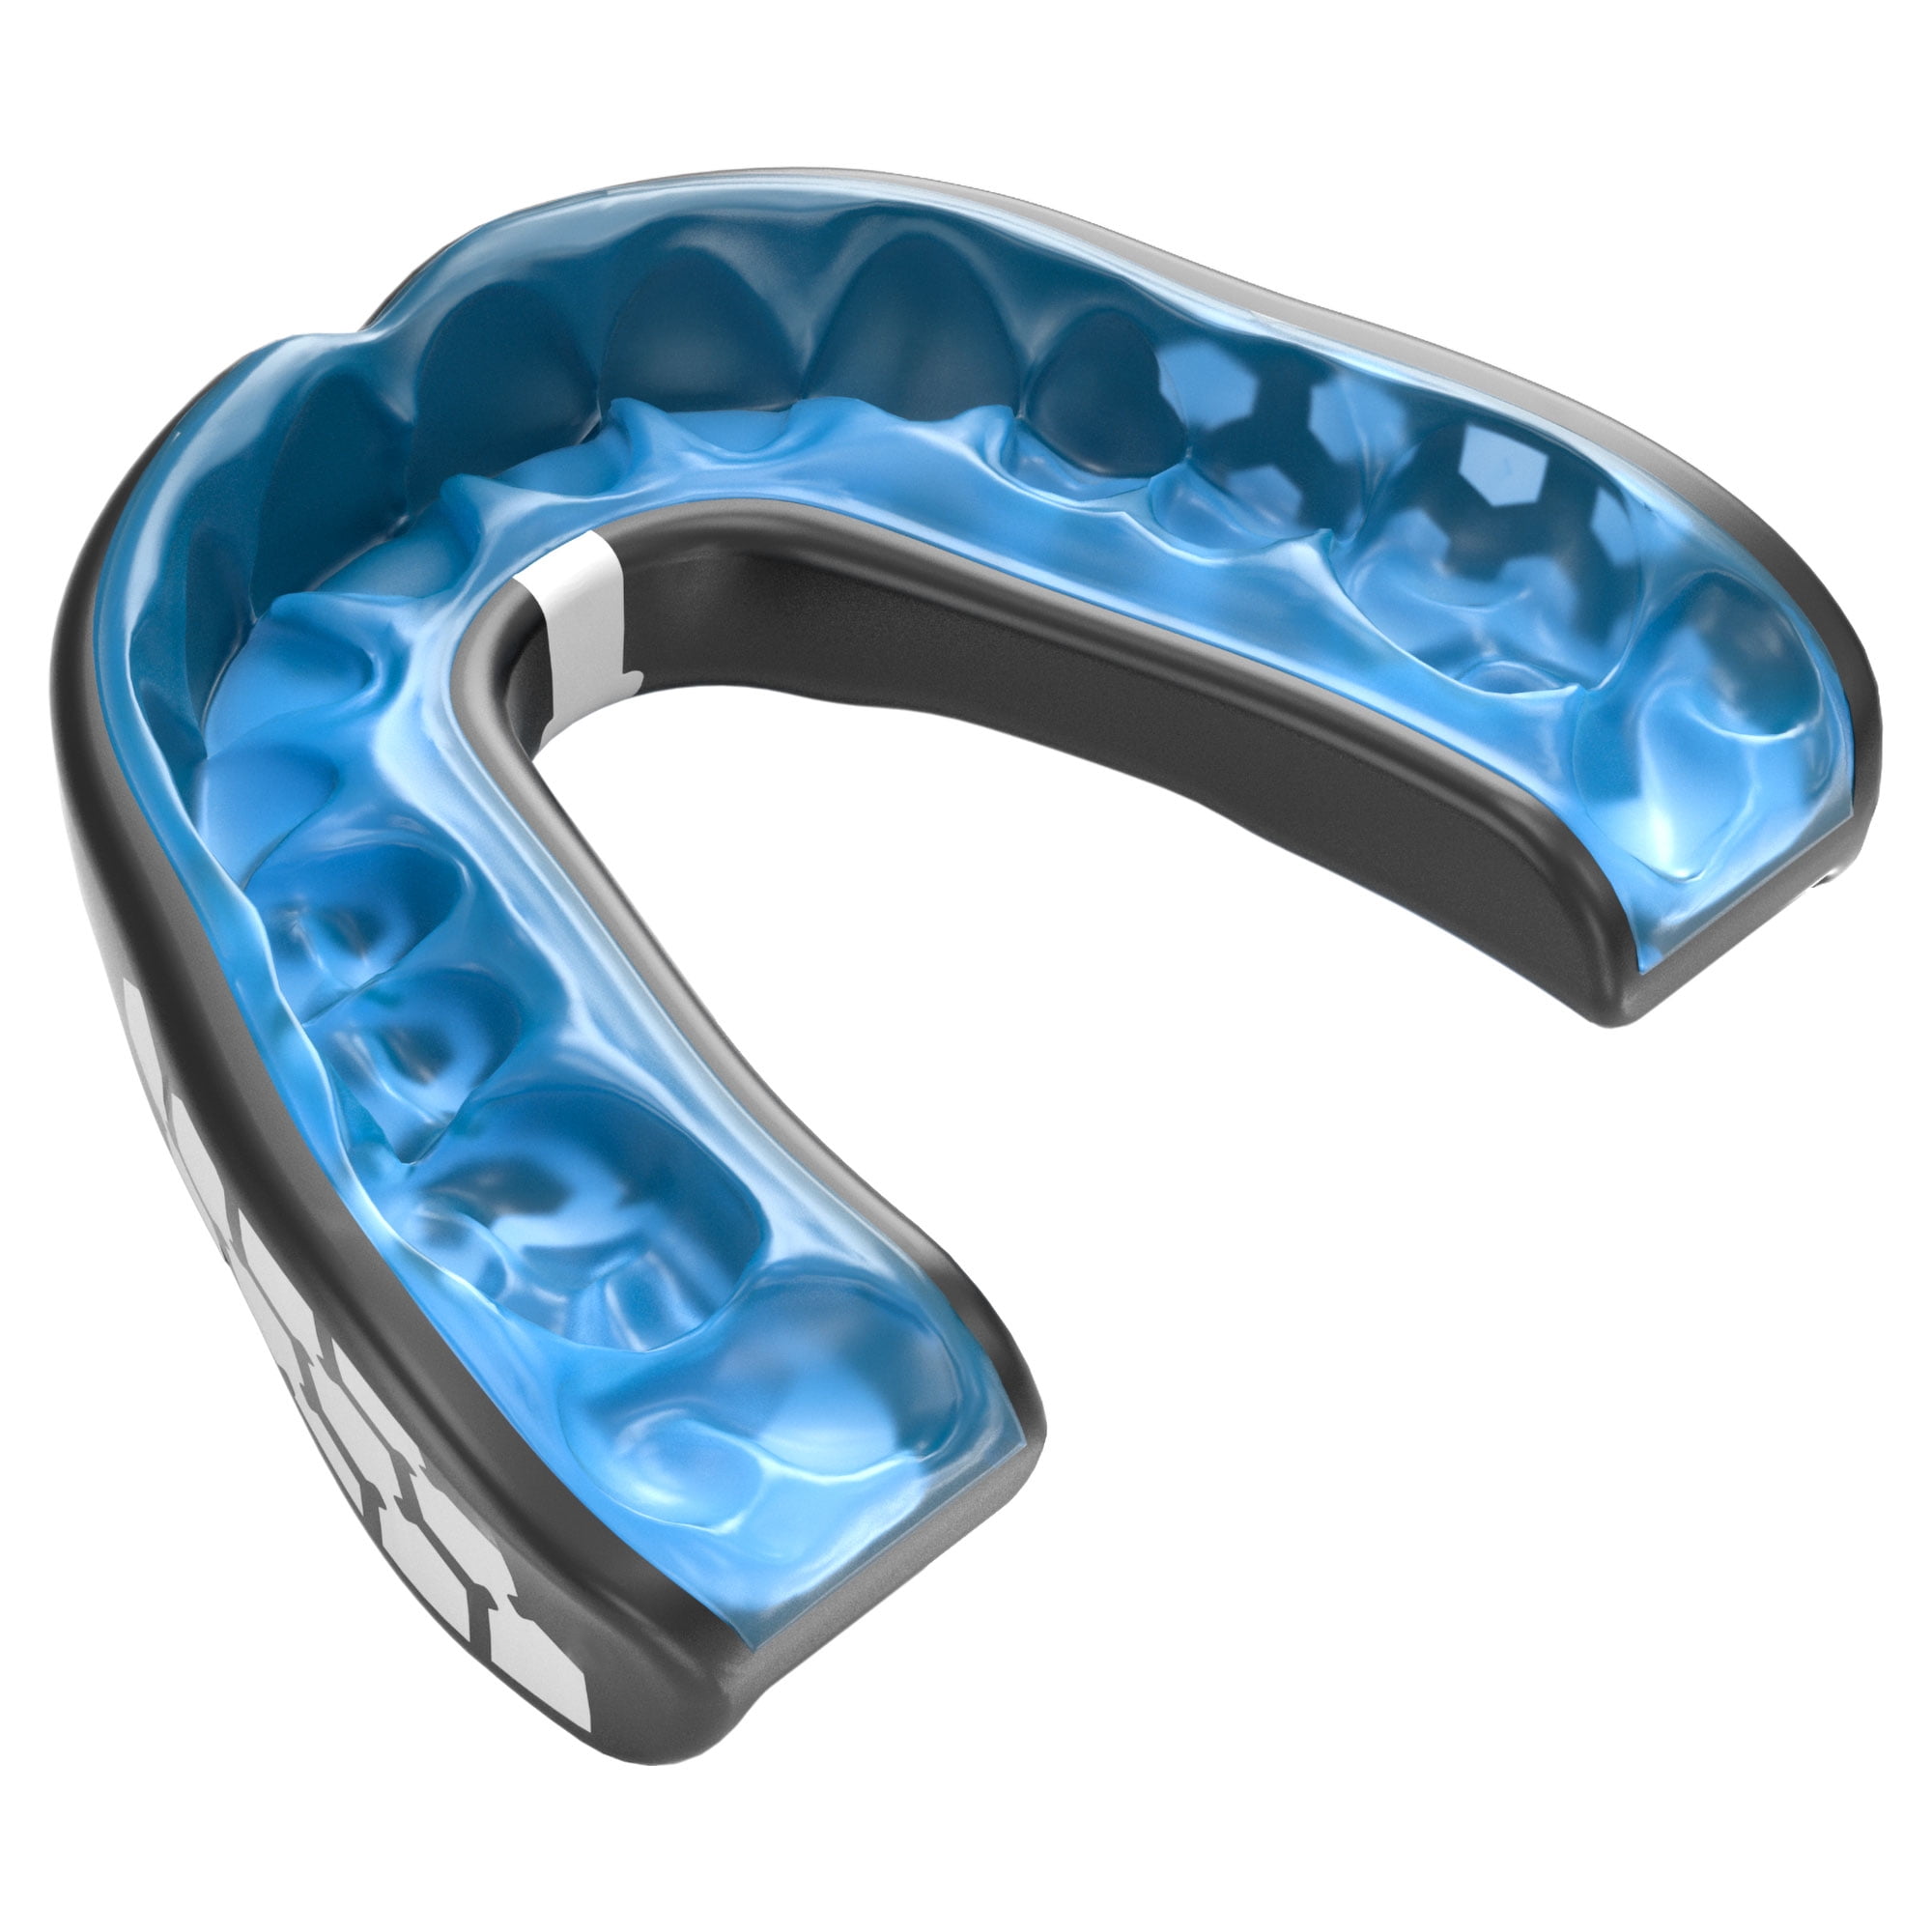 CHAMPRO ECONOMY MOUTH GUARD SOLD IN SINGLES VARIOUS COLORS ADULT AND YOUTH 